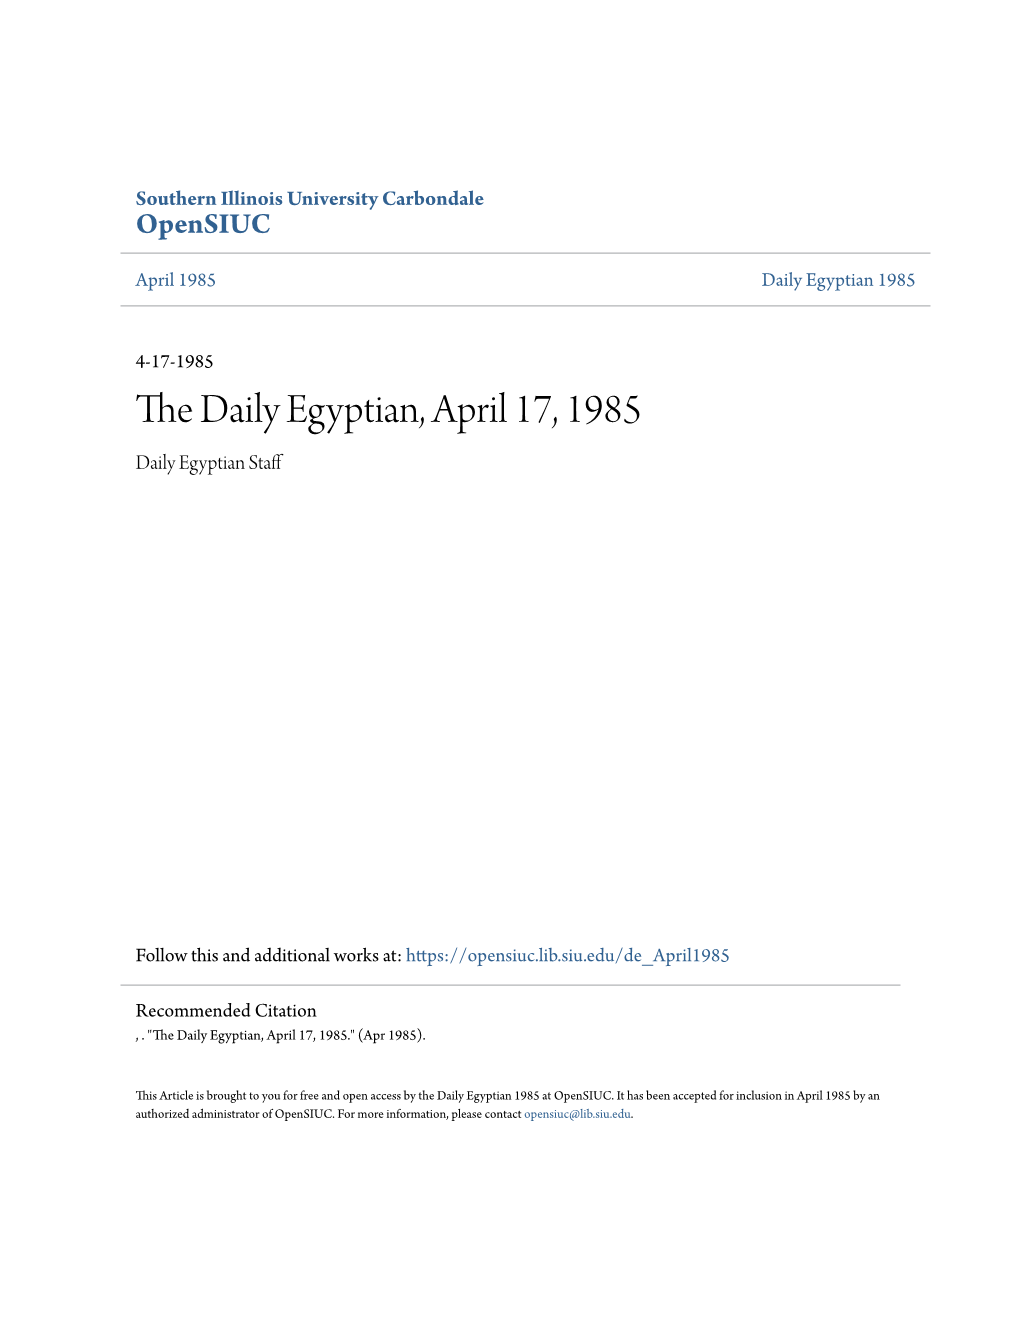 The Daily Egyptian, April 17, 1985